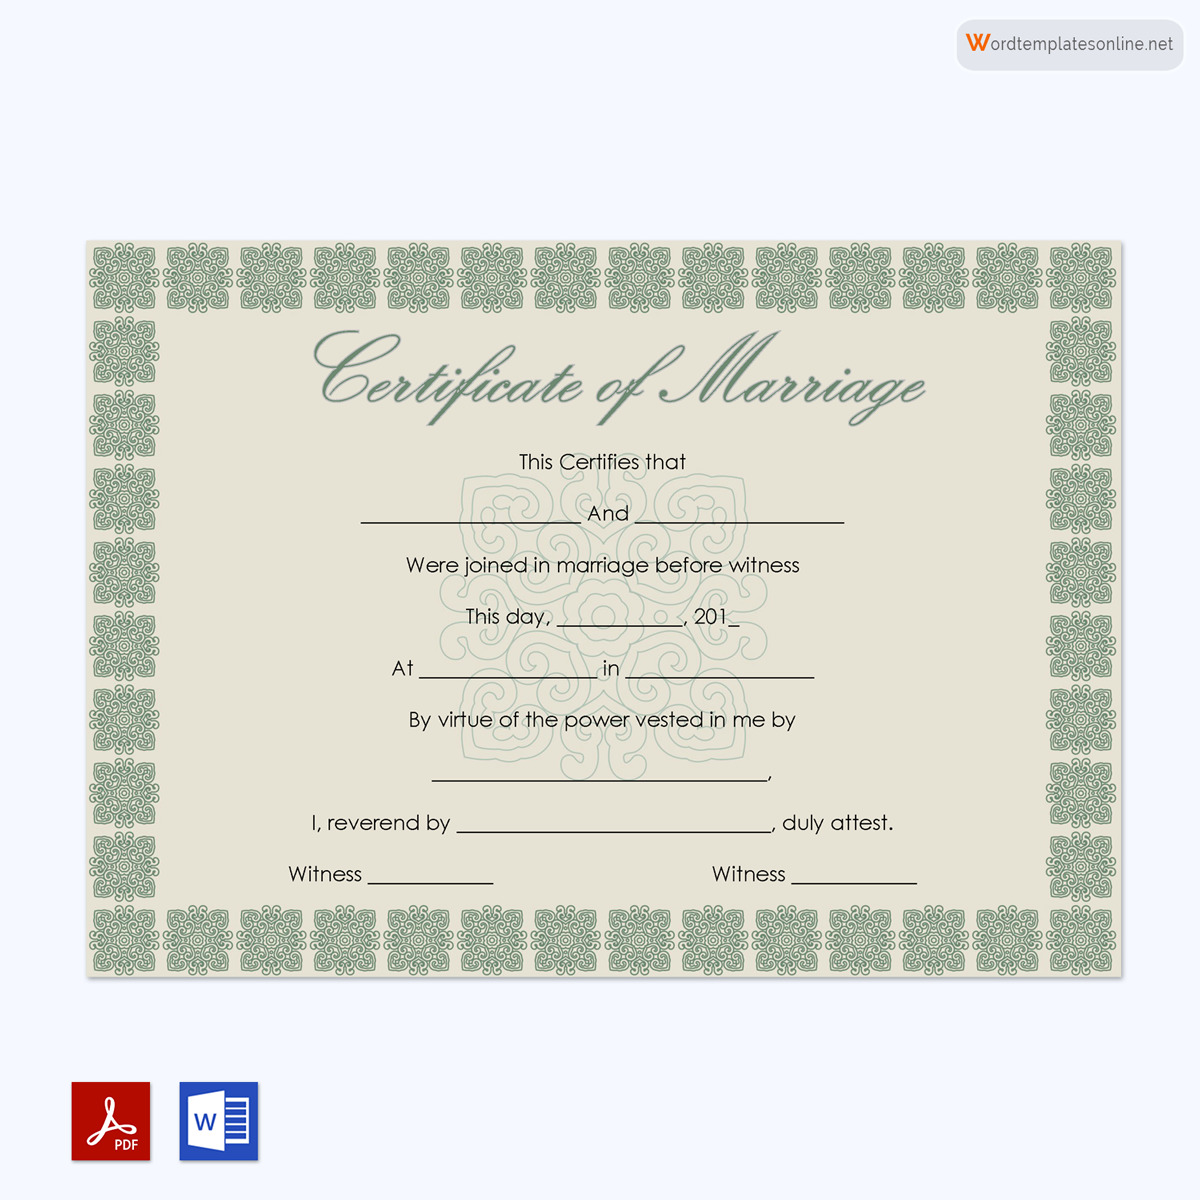  marriage certificate online fake 42